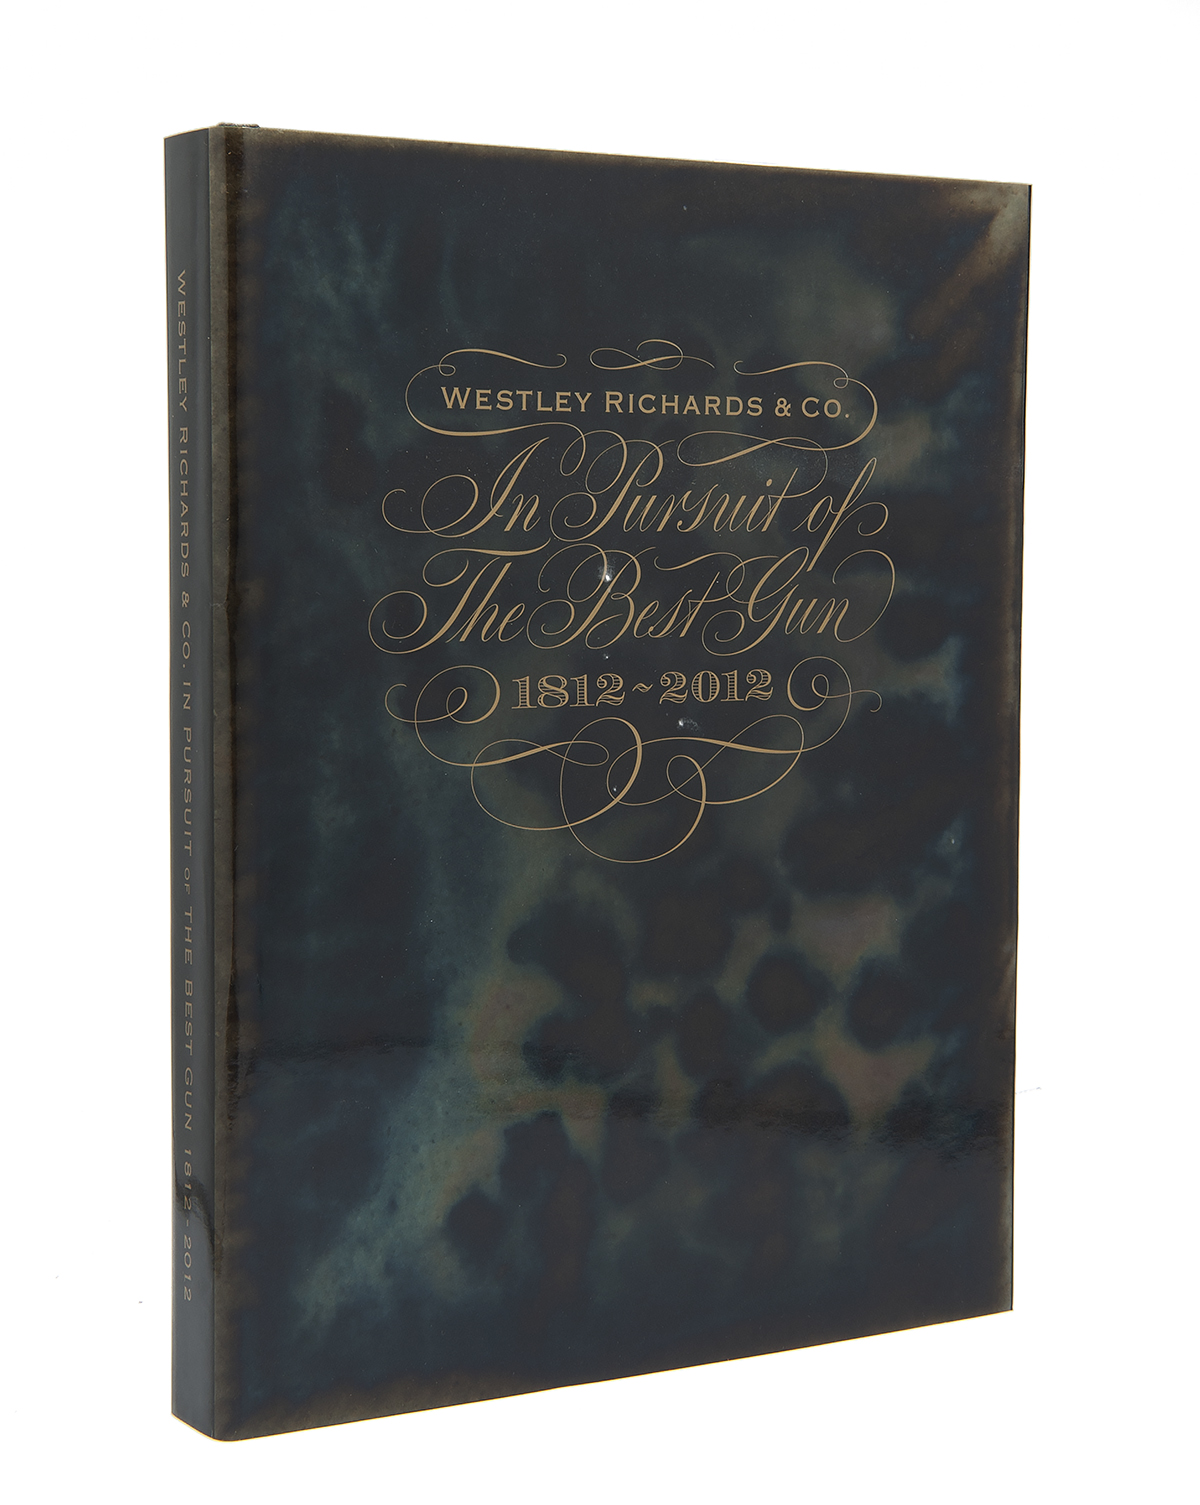 A NEW AND UNUSED COPY OF 'WESTLEY RICHARDS & CO. - IN PURSUIT OF THE BEST GUN 1812-2012', a